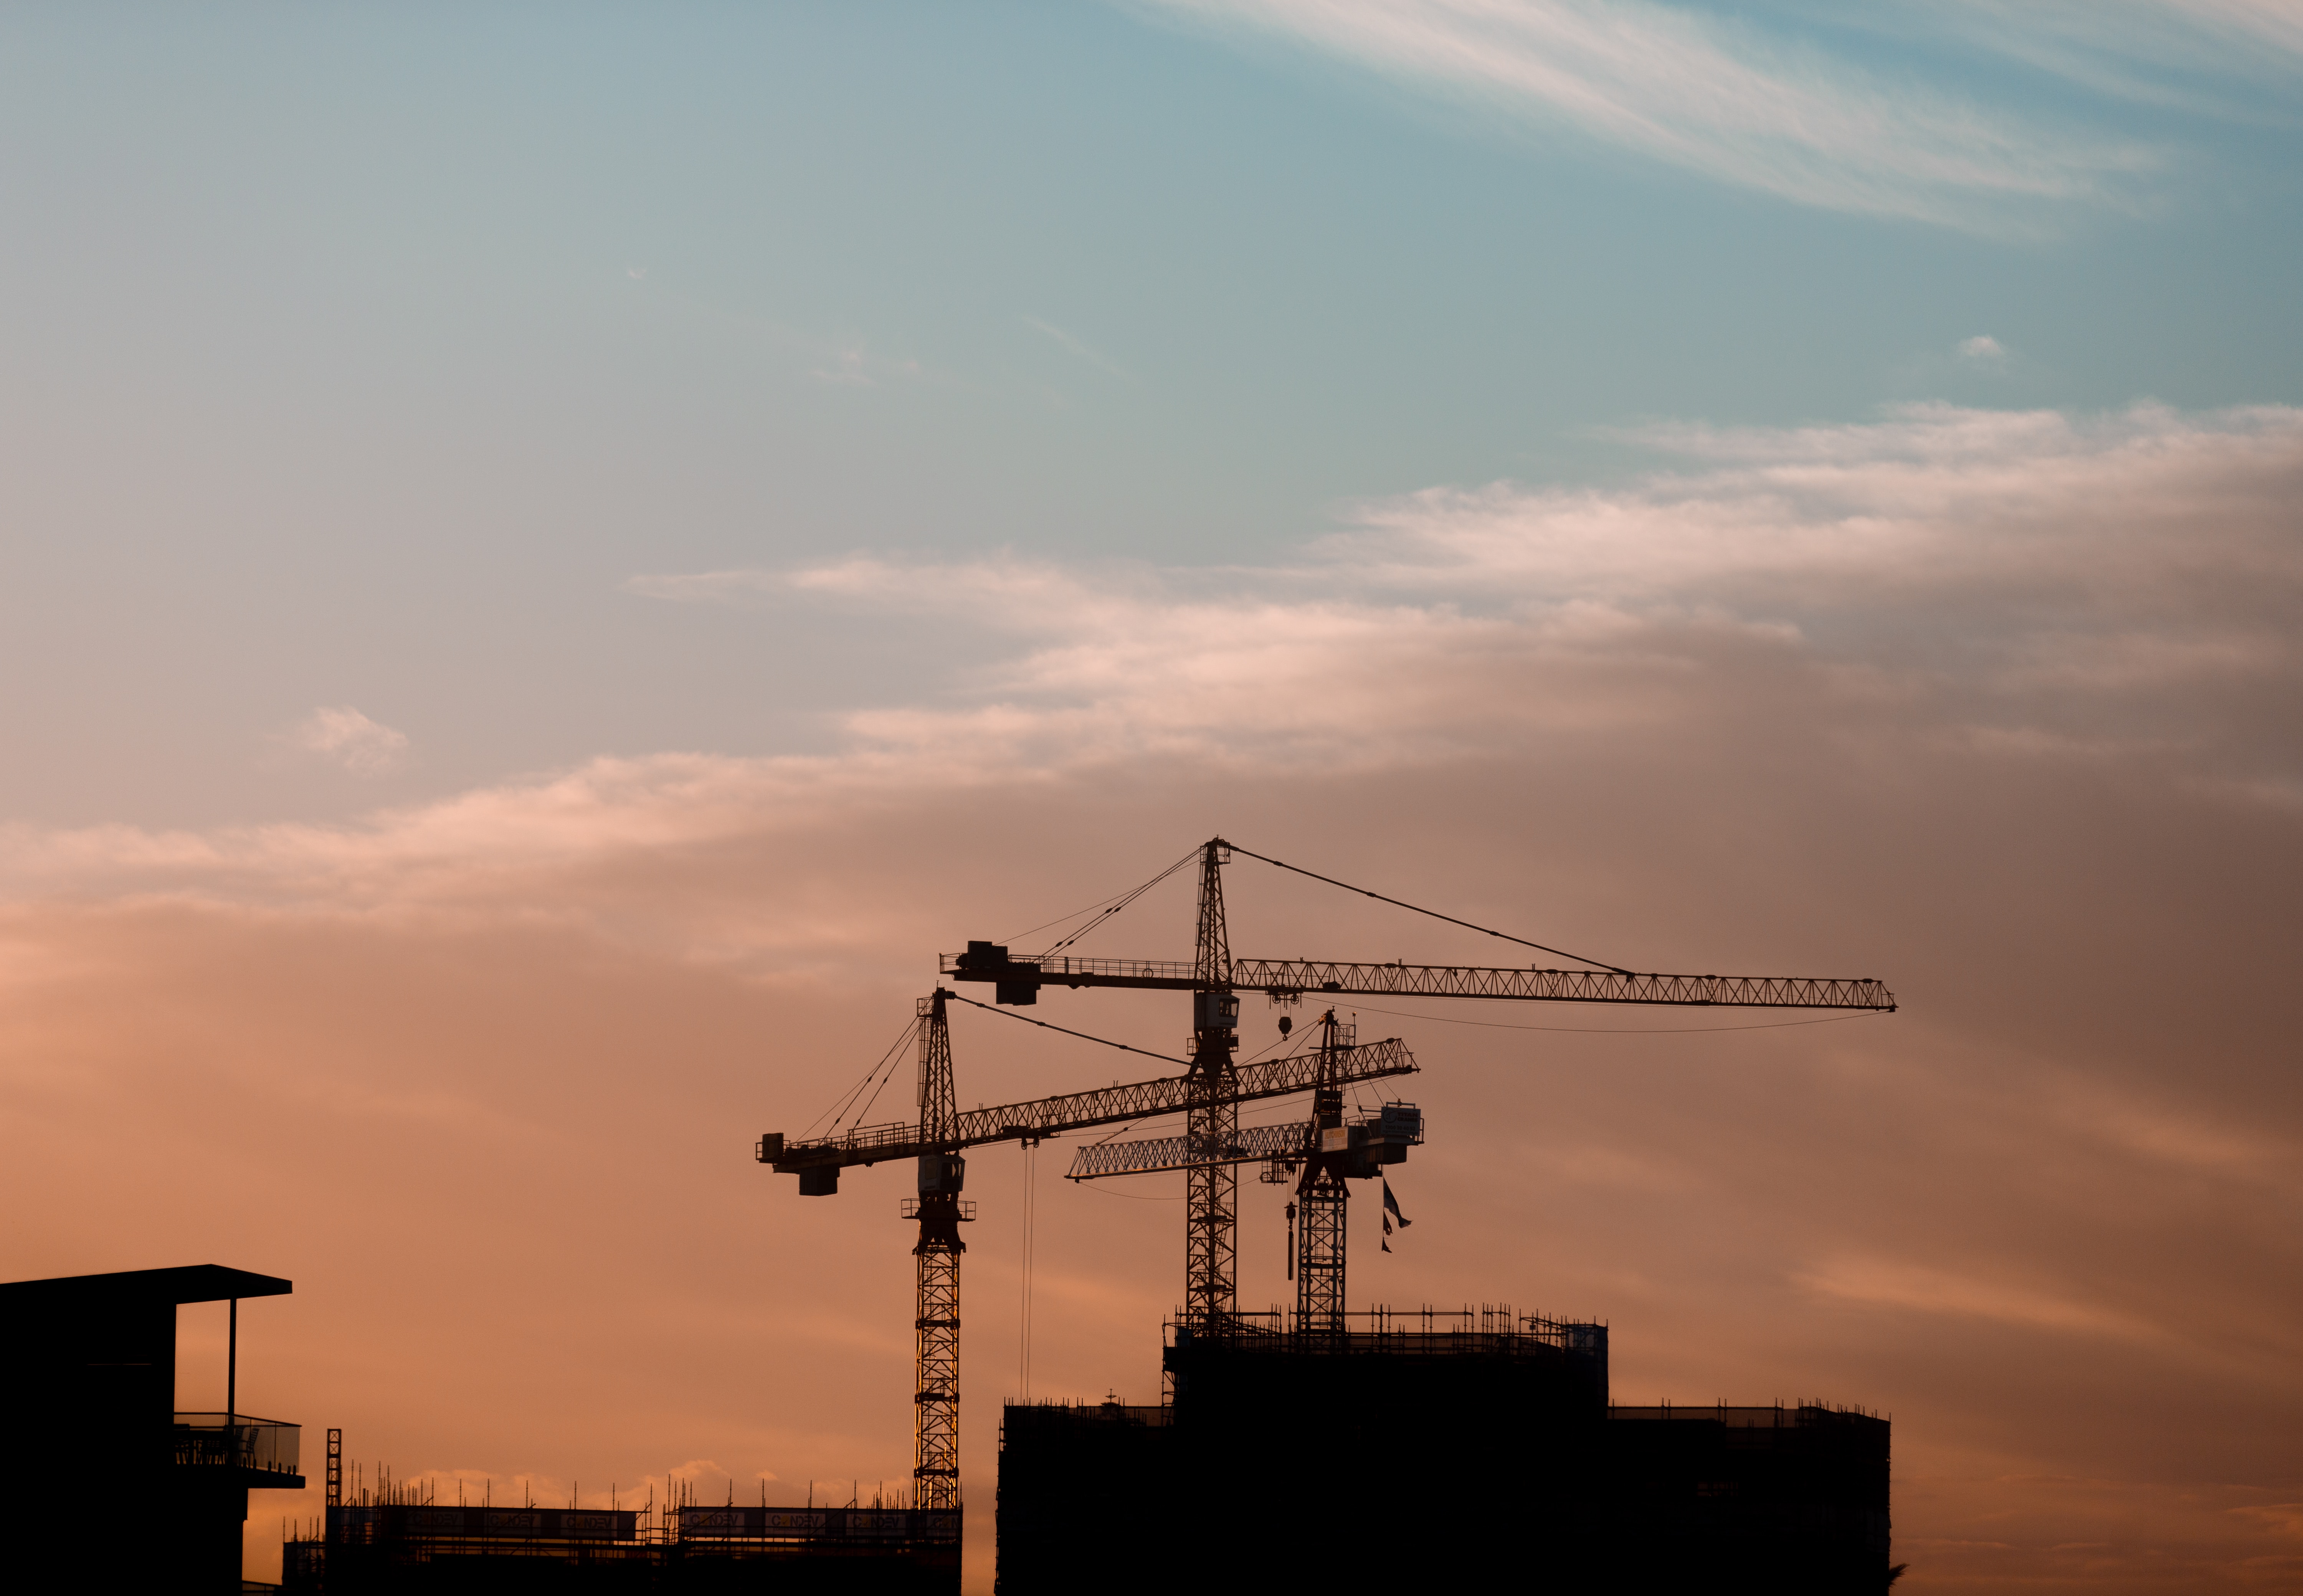 Two cranes on top of buildings in front of a pink sunset